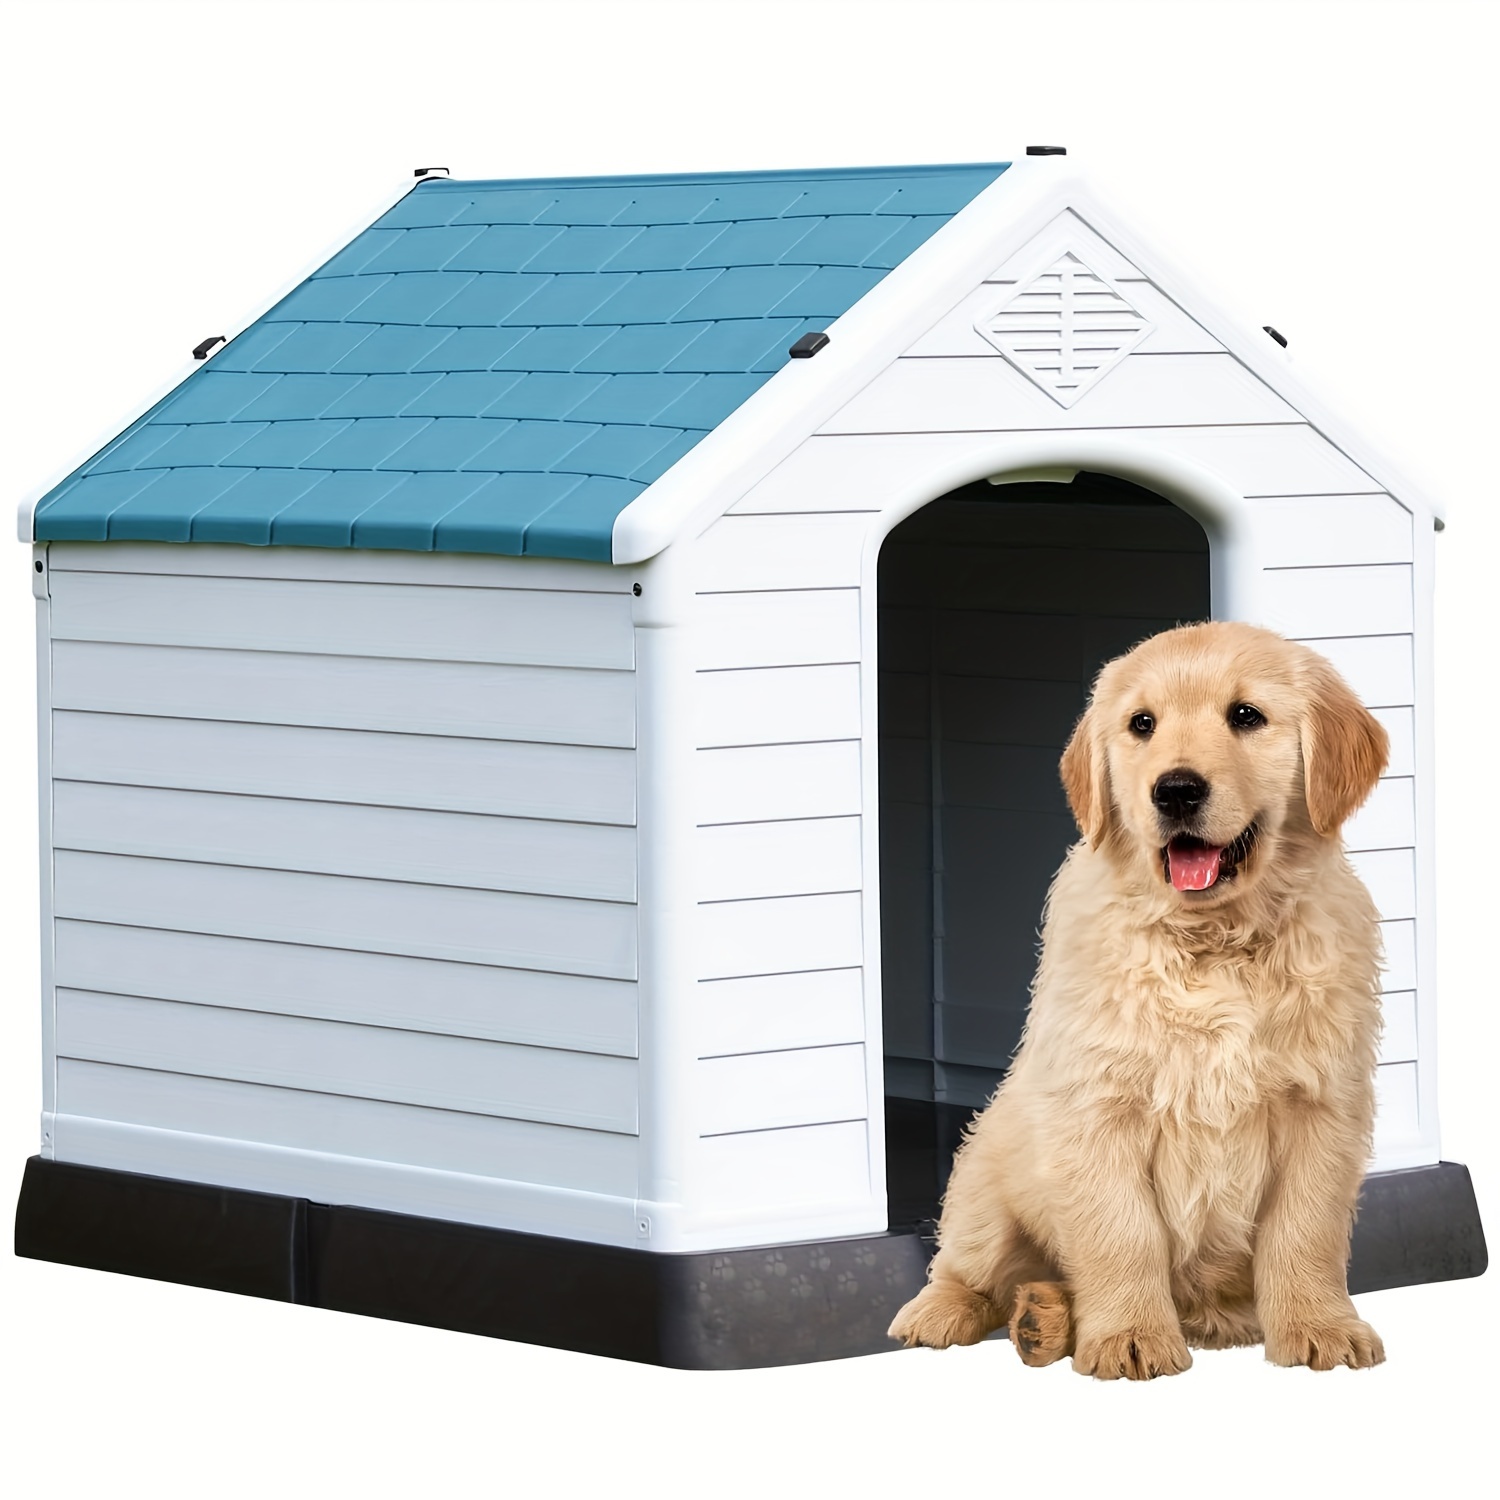 

Extra Large Dog House, Outdoor Dog Kennels, Waterproof Pet Shelter, Durable Plastic Puppy Shelter Kennel For Small Medium Large Dogs With Air Vents & Elevated Floor